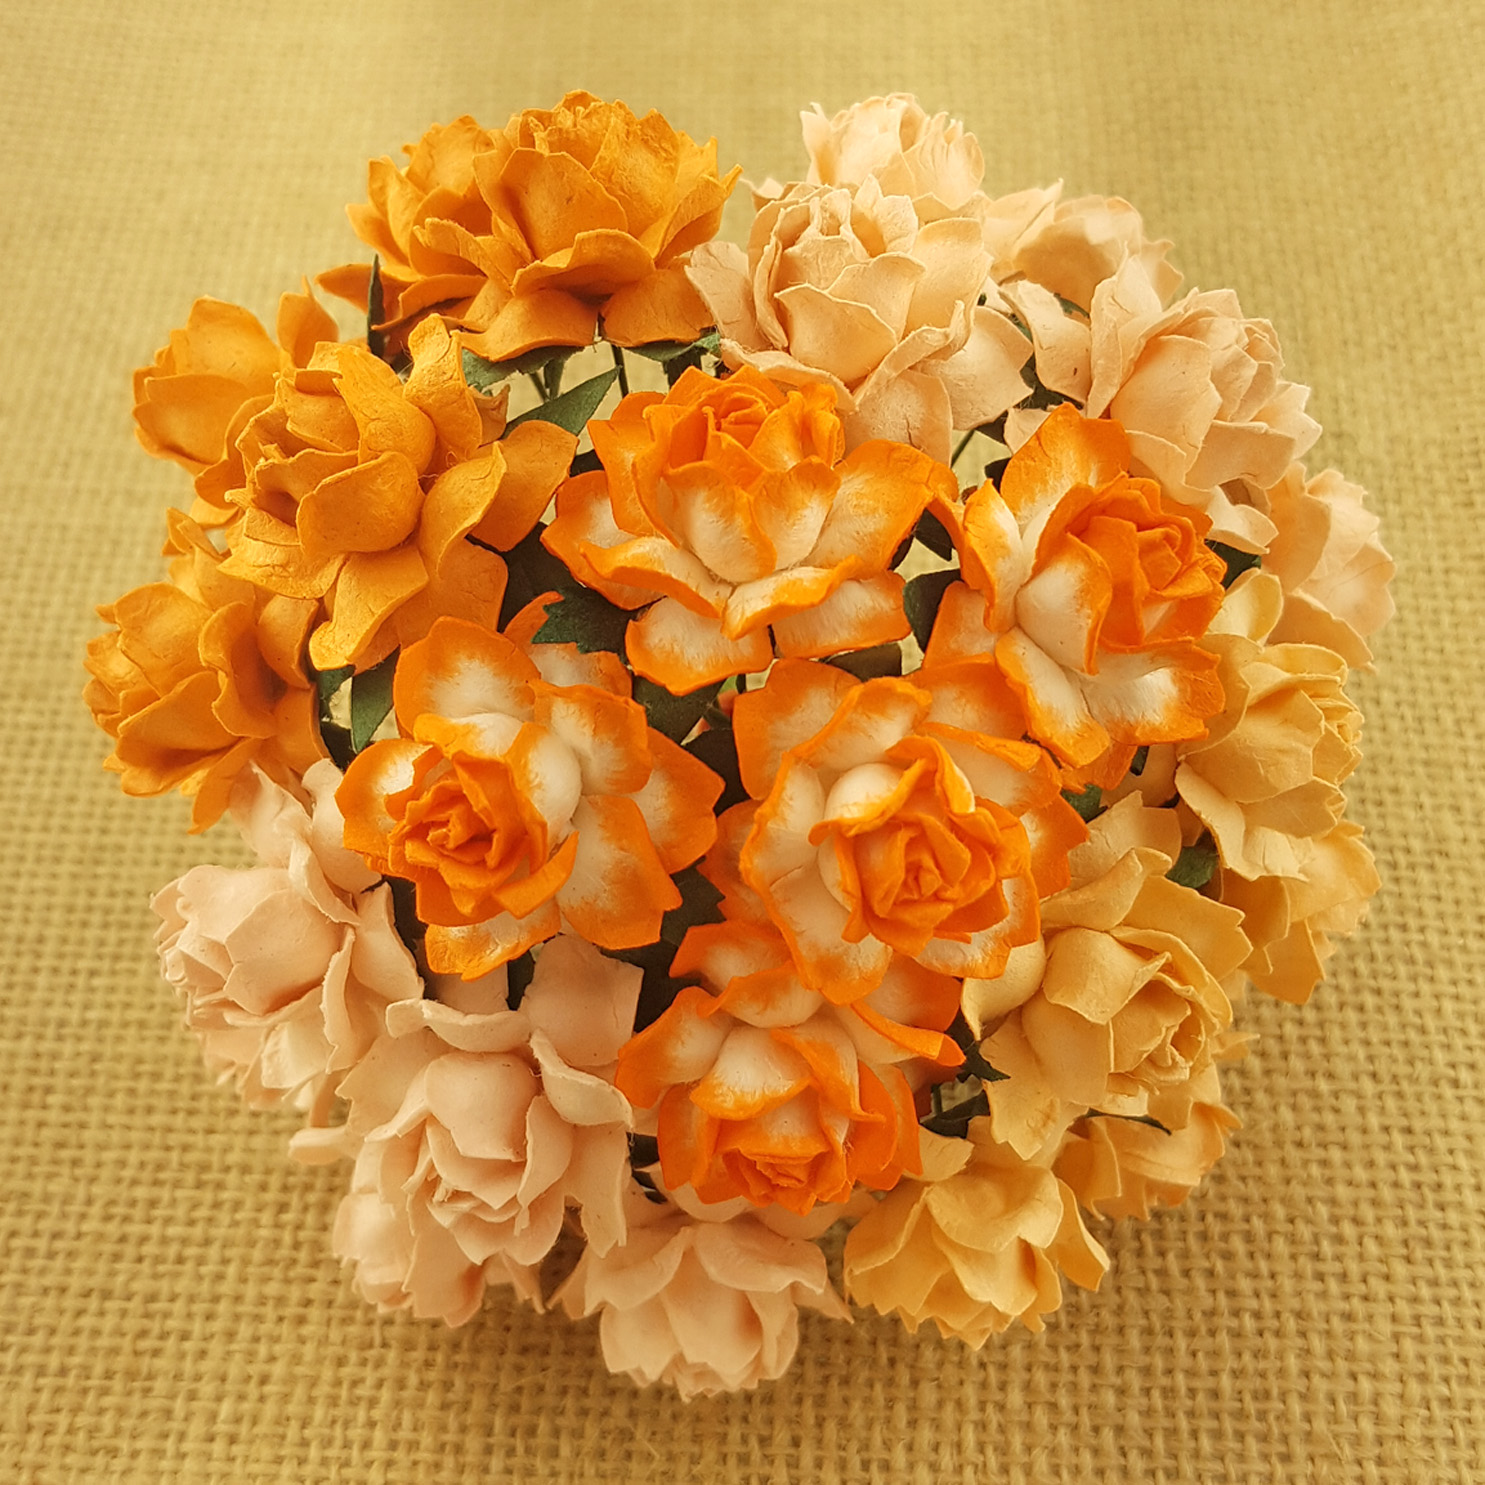 50 MIXED PEACH/ORANGE MULBERRY PAPER COTTAGE ROSES - 5 COLOR